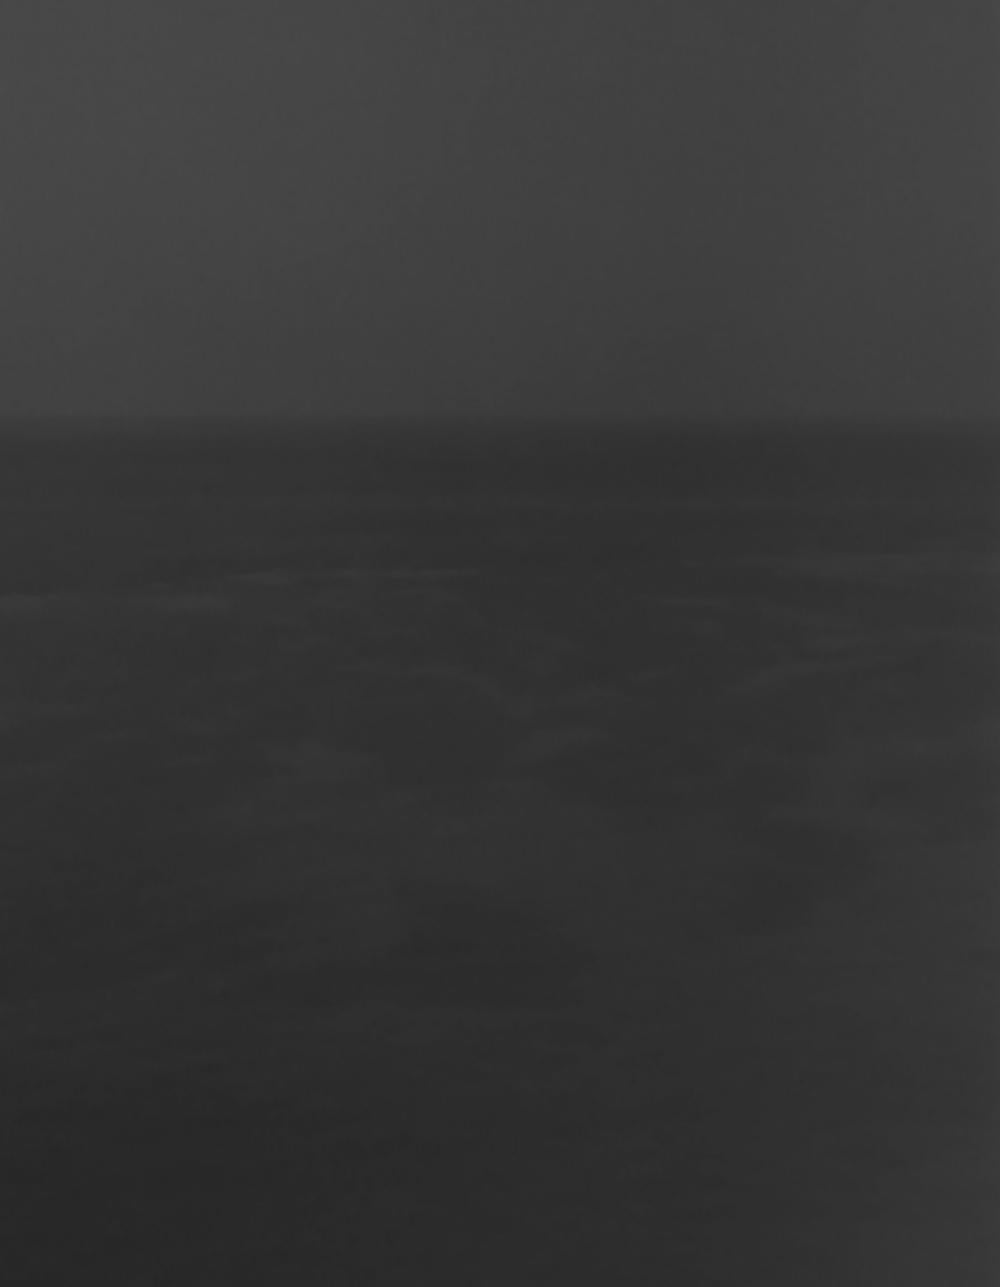 HIROSHI SUGIMOTO (*1948, Japan)
357 Ionian Sea, Santa Cesarea
1987
Gelatin silver print 
Sheet 50.8 x 61 cm (20 x 24 in.) 
Edition of 25; Ed. no 1/25

For over 40 years, the Japanese artist Hiroshi Sugimoto (*1948) has been creating fascinating and